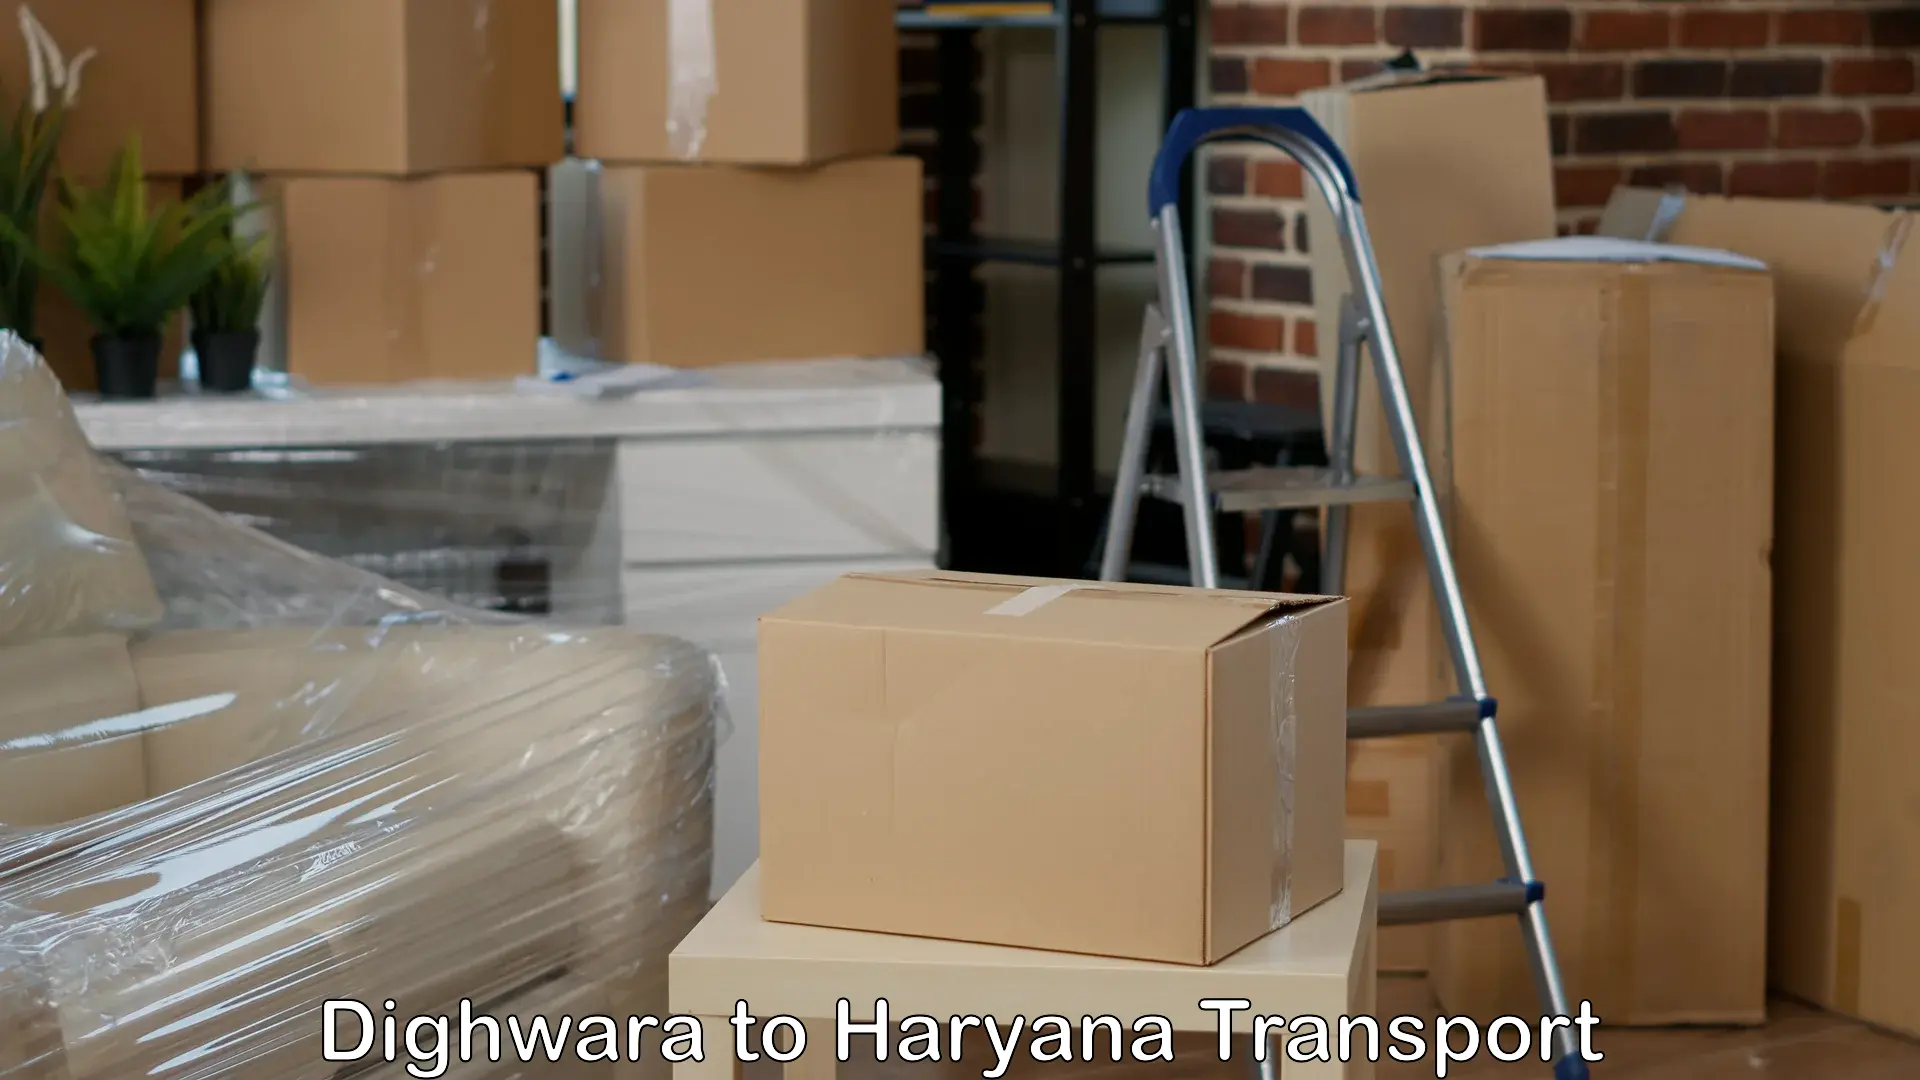 Air freight transport services Dighwara to Sonipat